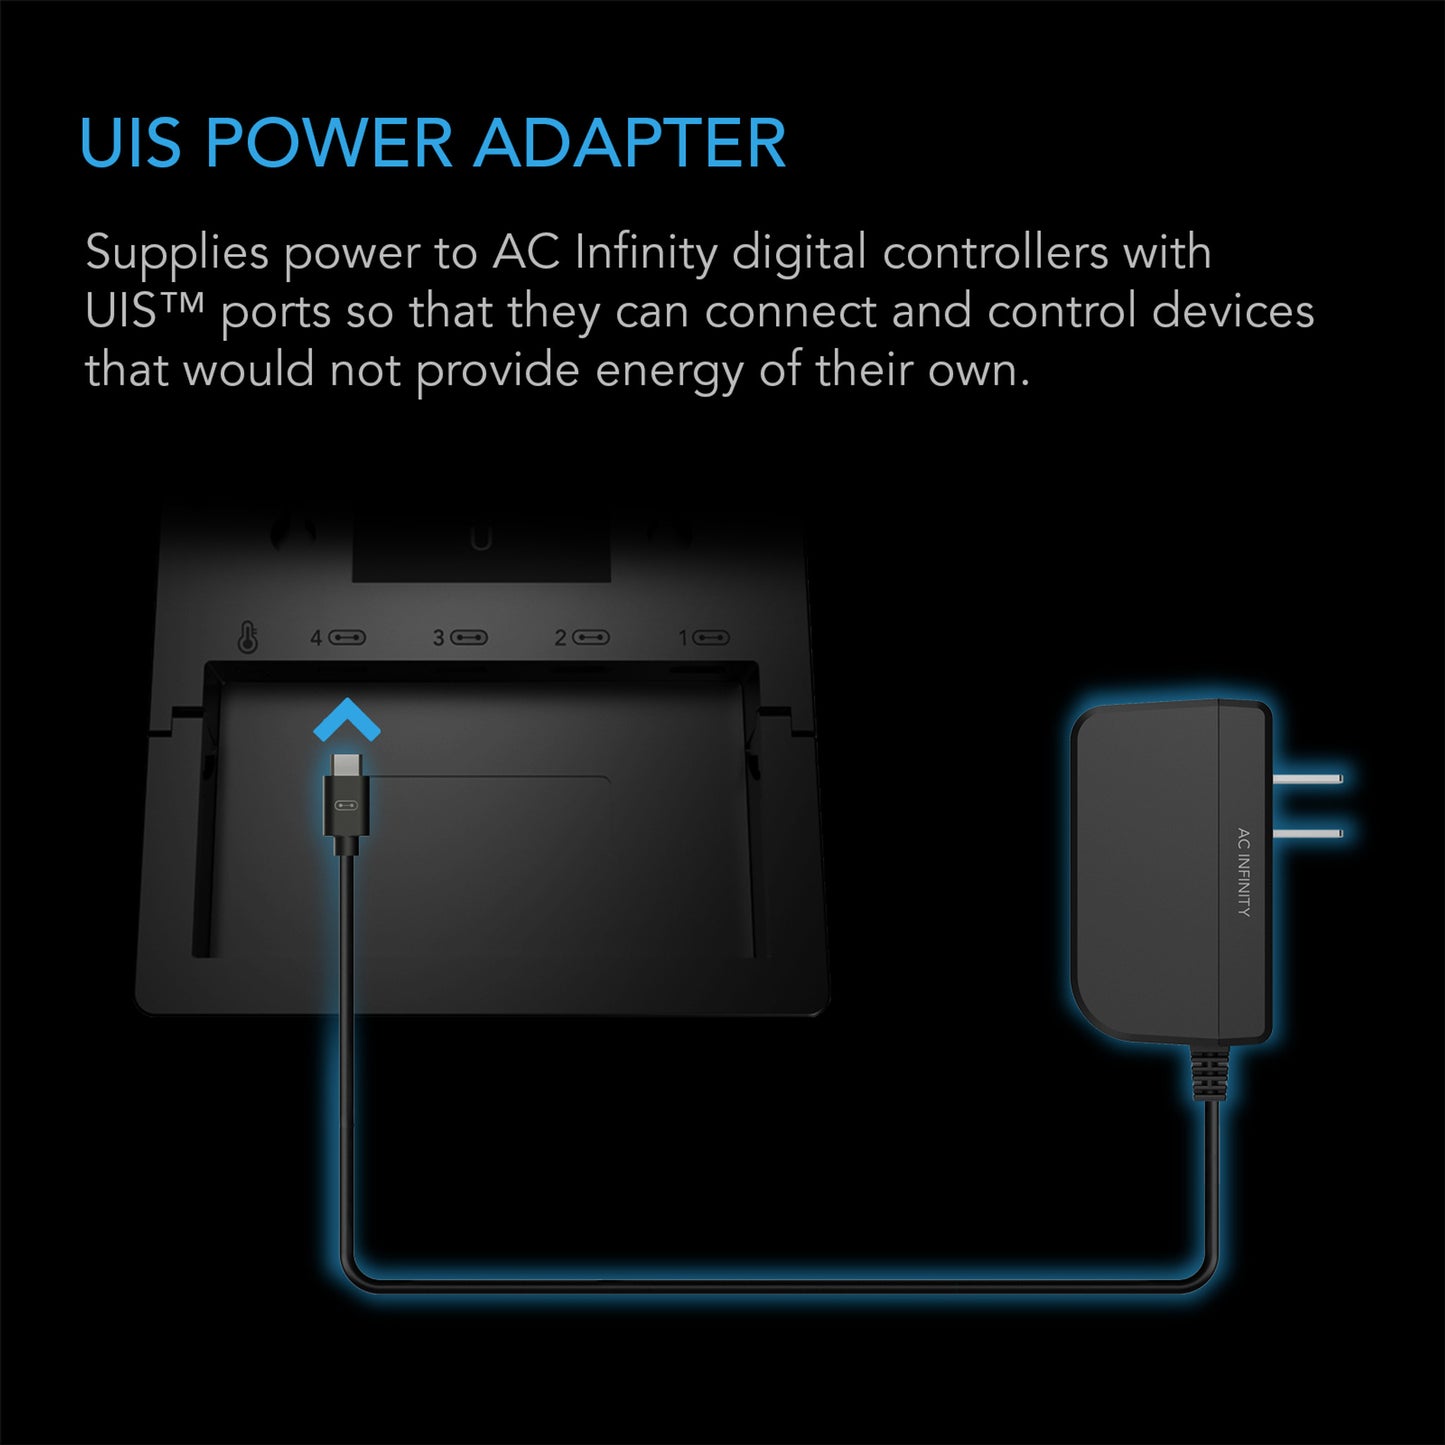 UIS POWER ADAPTER, FOR CONTROLLERS NOT POWERED BY UIS DEVICES